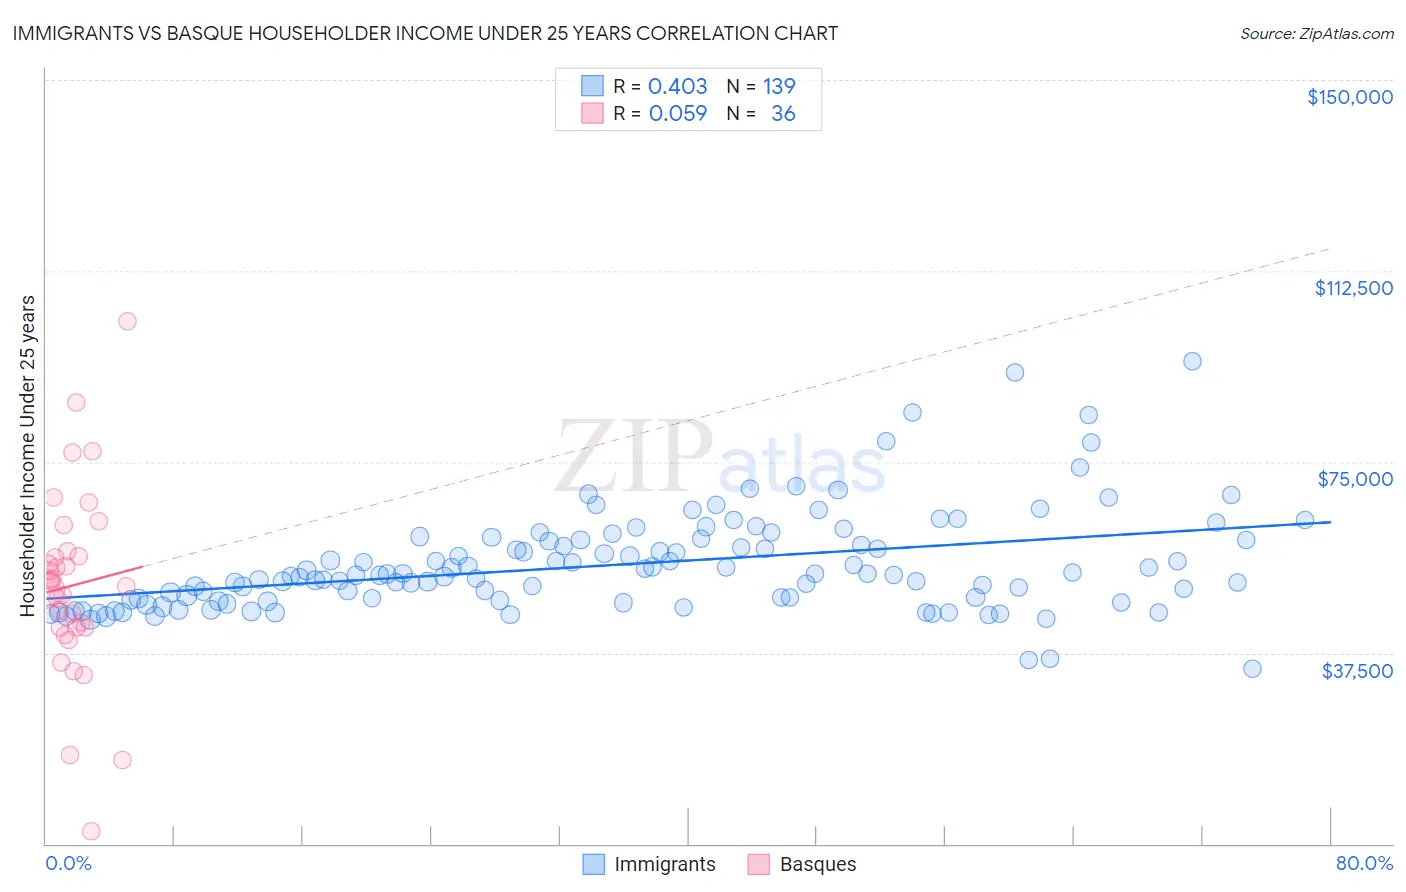 Immigrants vs Basque Householder Income Under 25 years